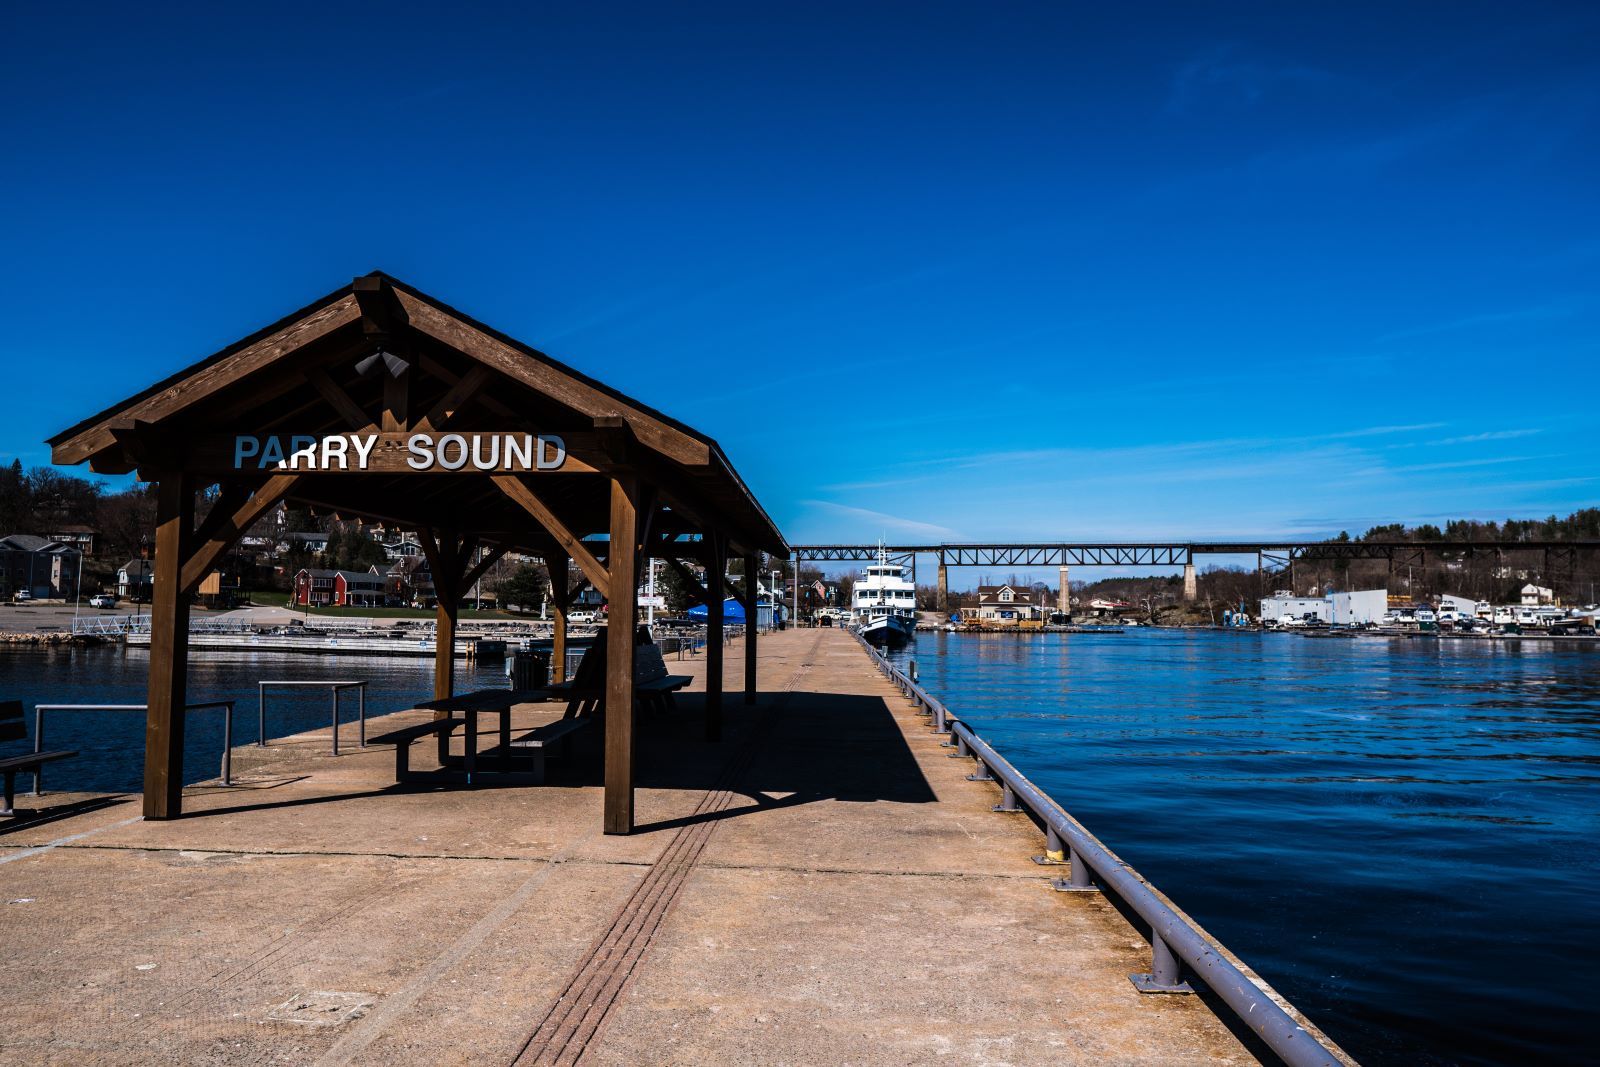 The Parry Sound, located in Ontario